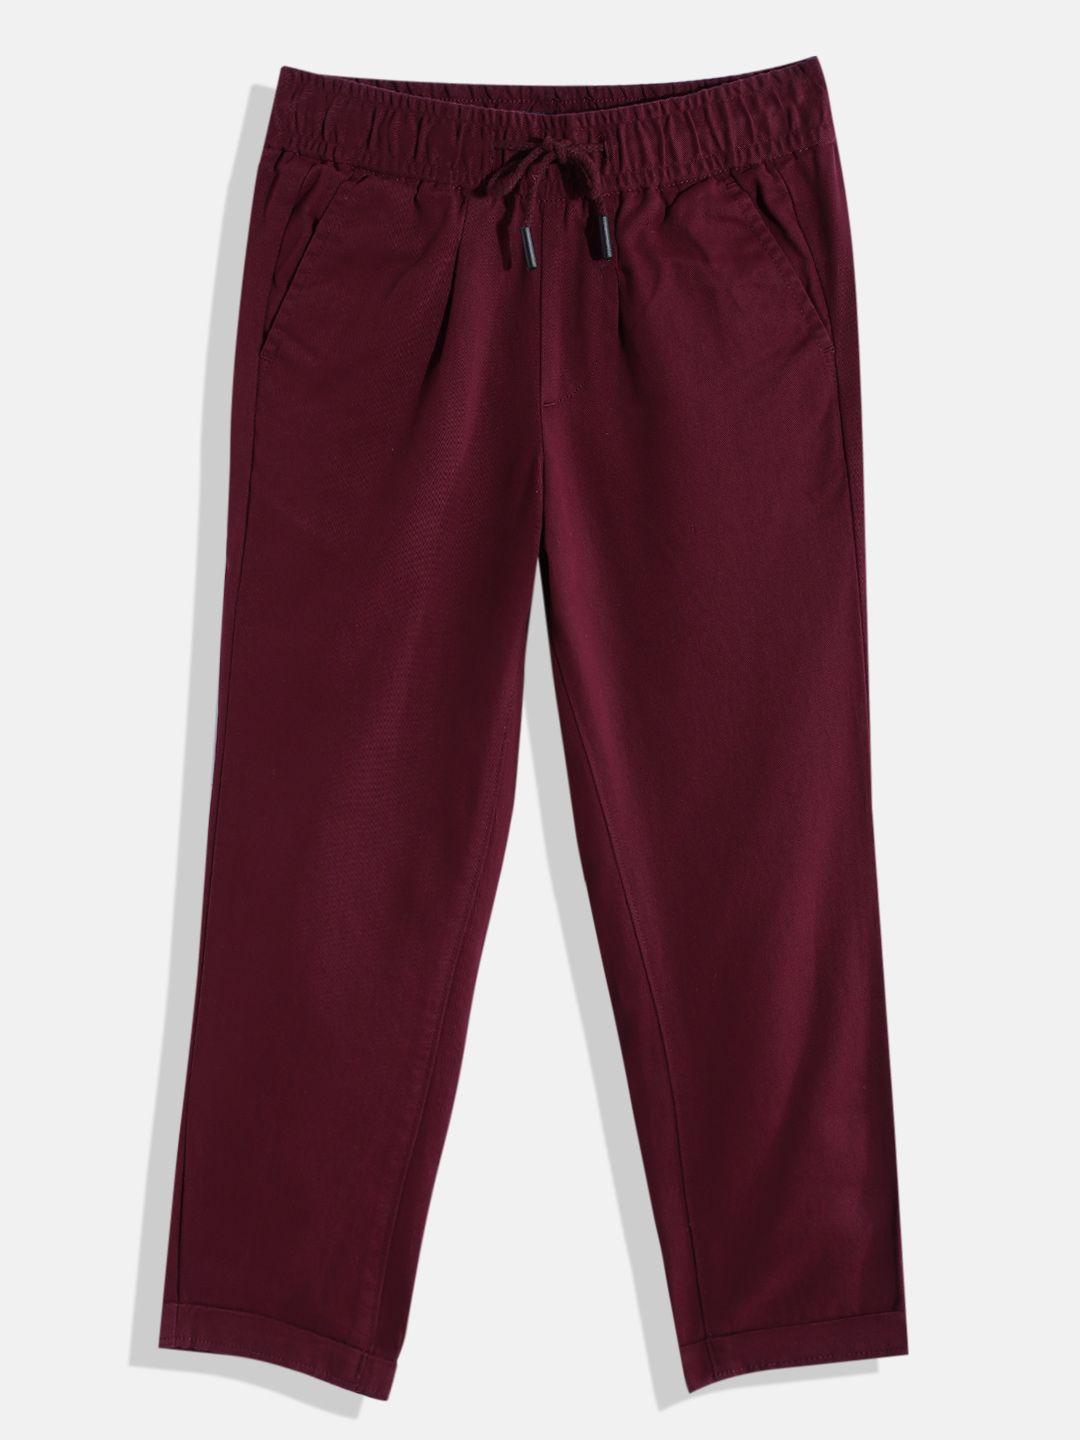 m&h juniors boys maroon pure cotton solid trousers